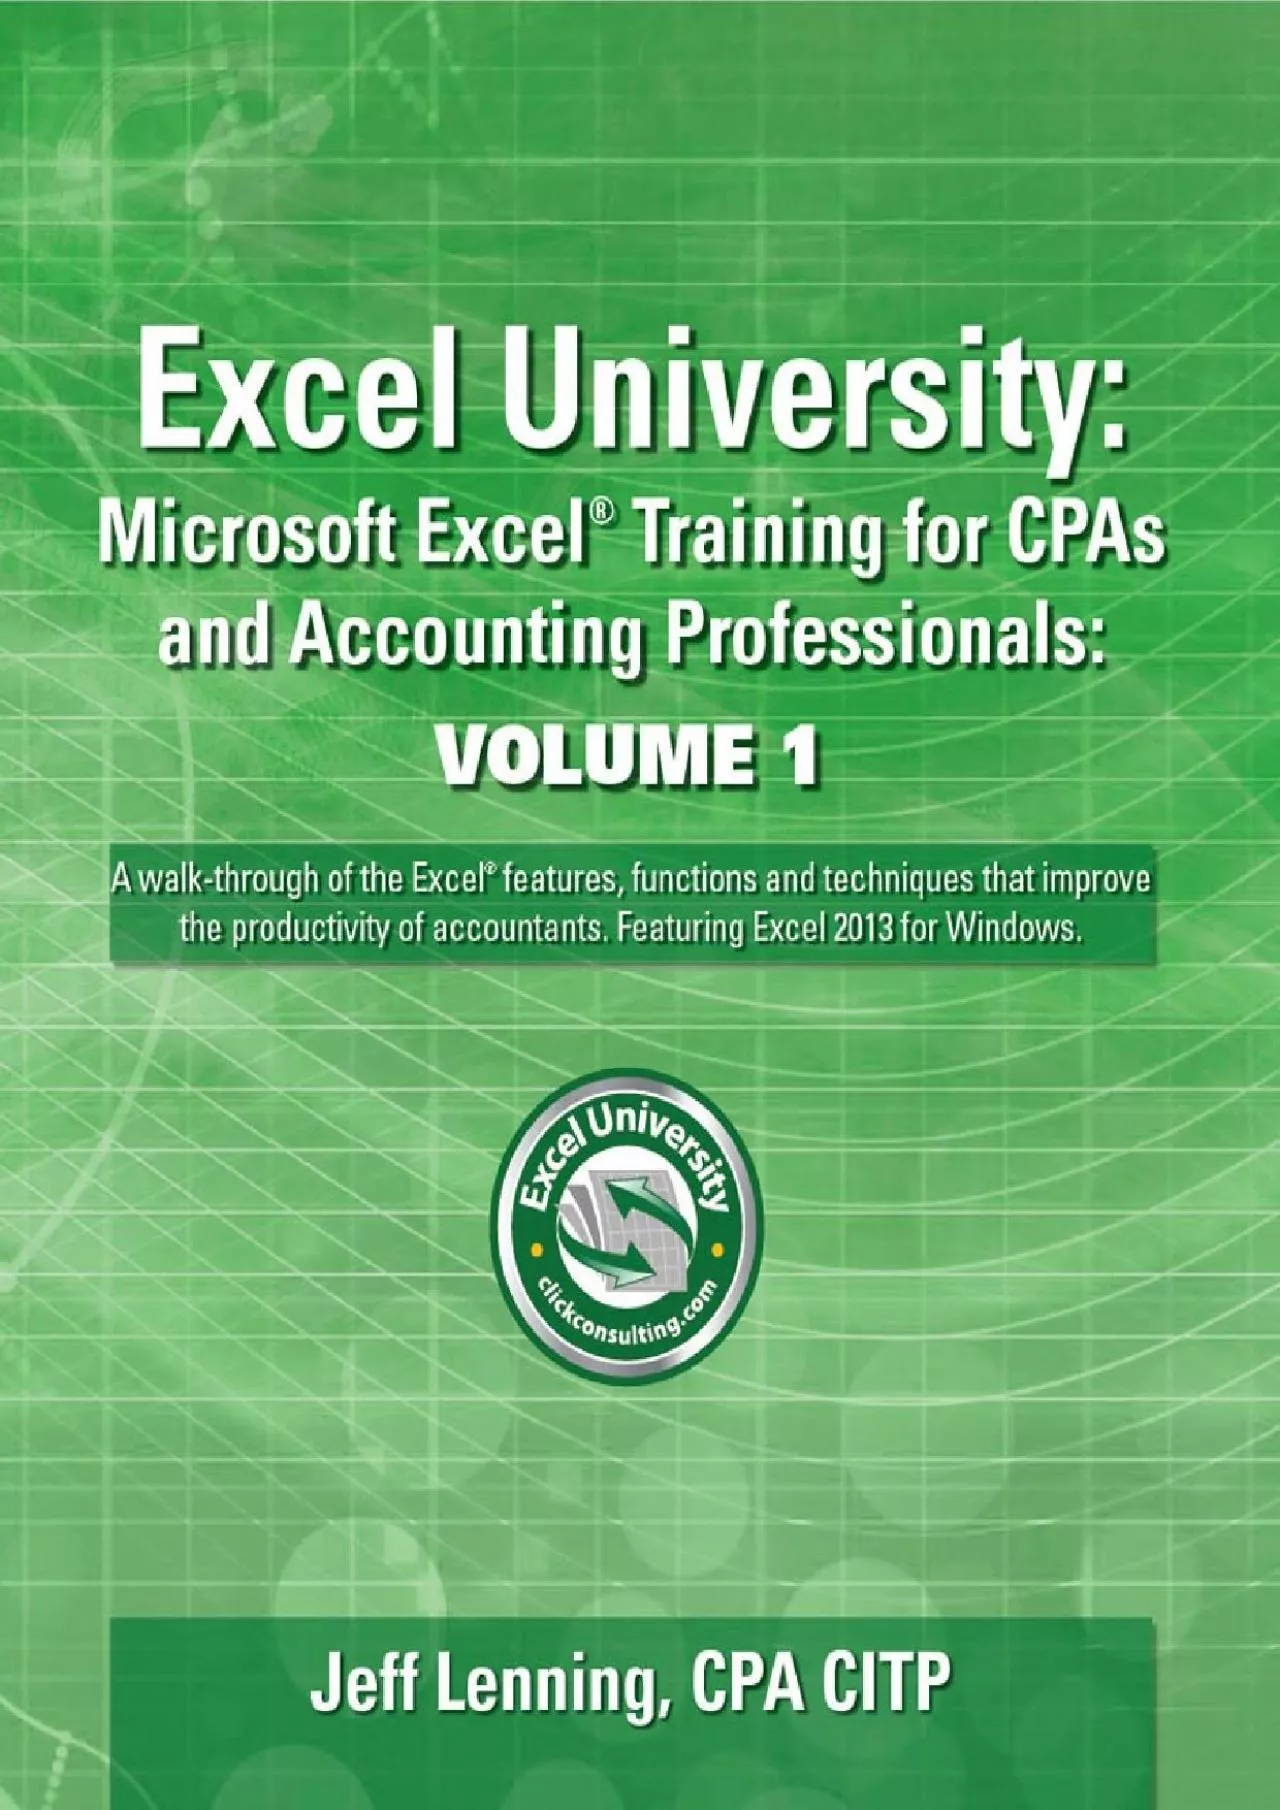 (BOOS)-Excel University Volume 1 - Featuring Excel 2013 for Windows: Microsoft Excel Training